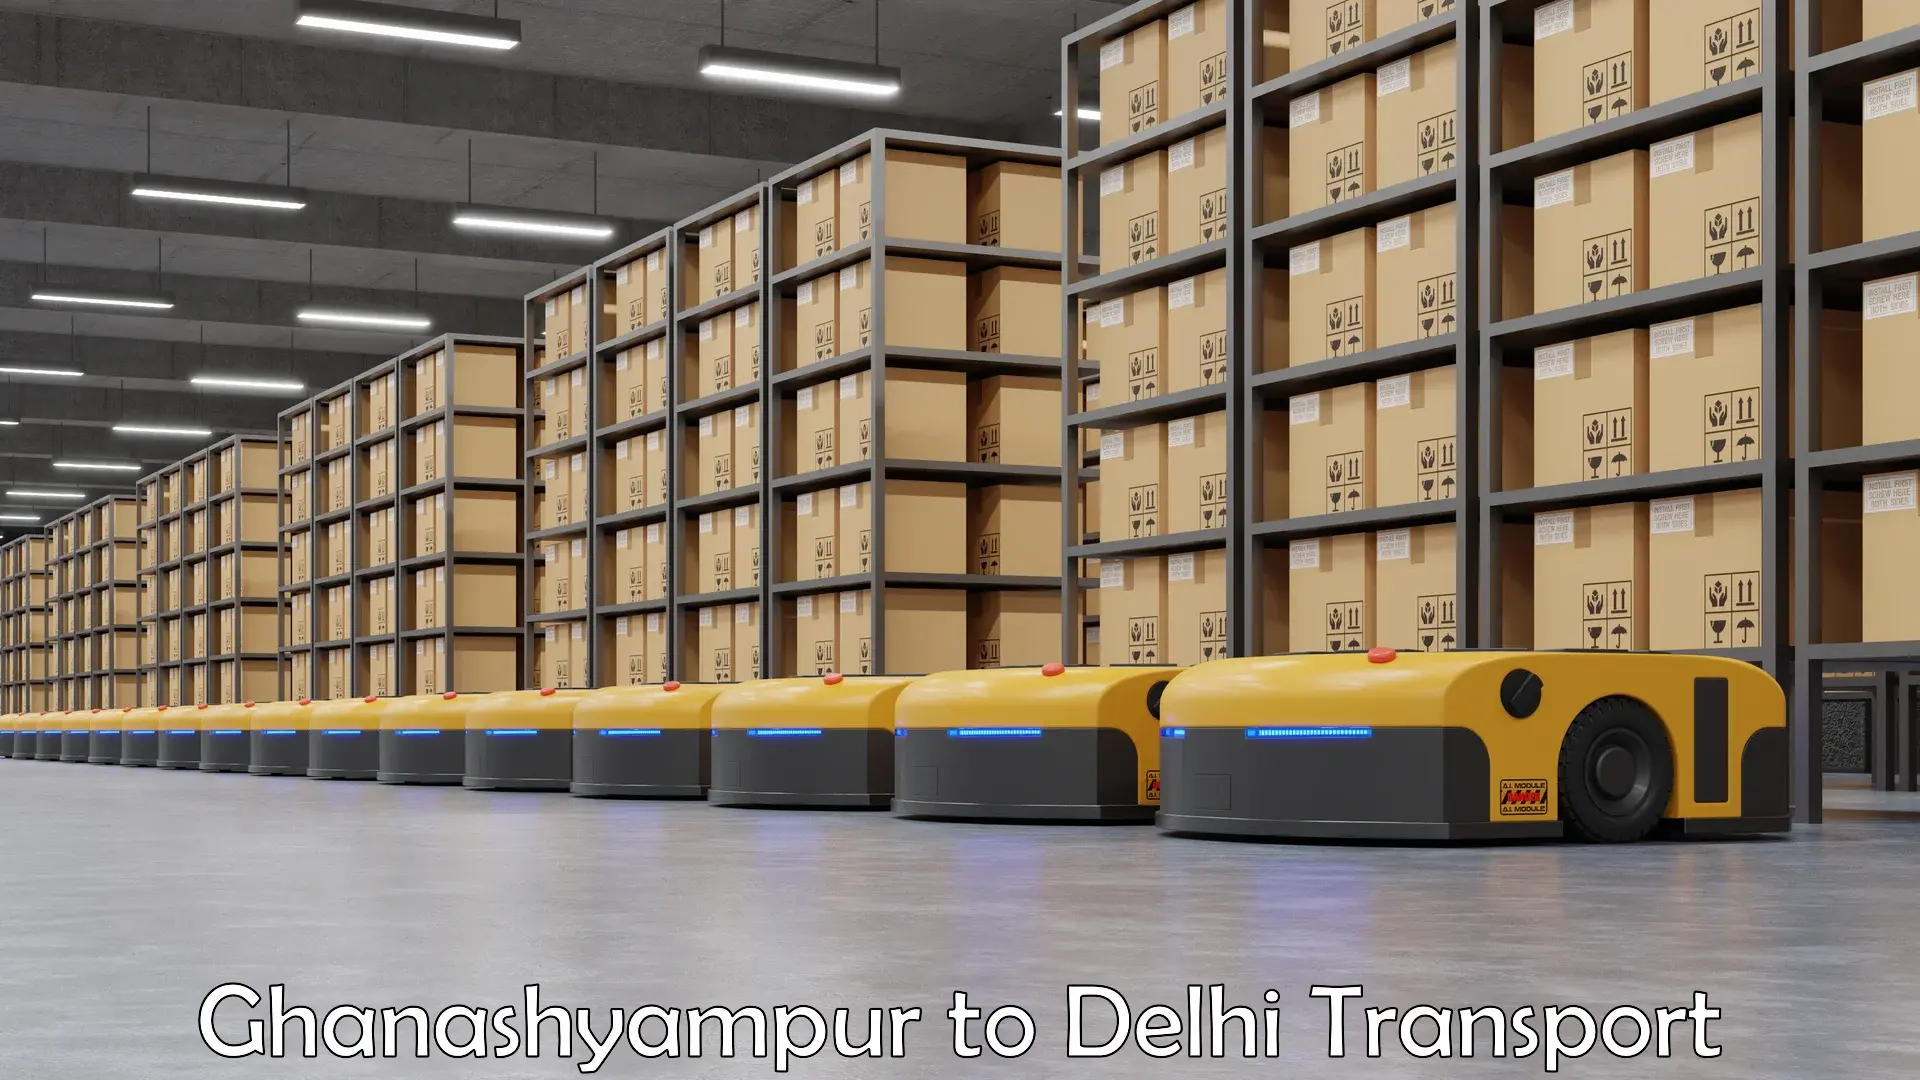 Daily parcel service transport Ghanashyampur to East Delhi